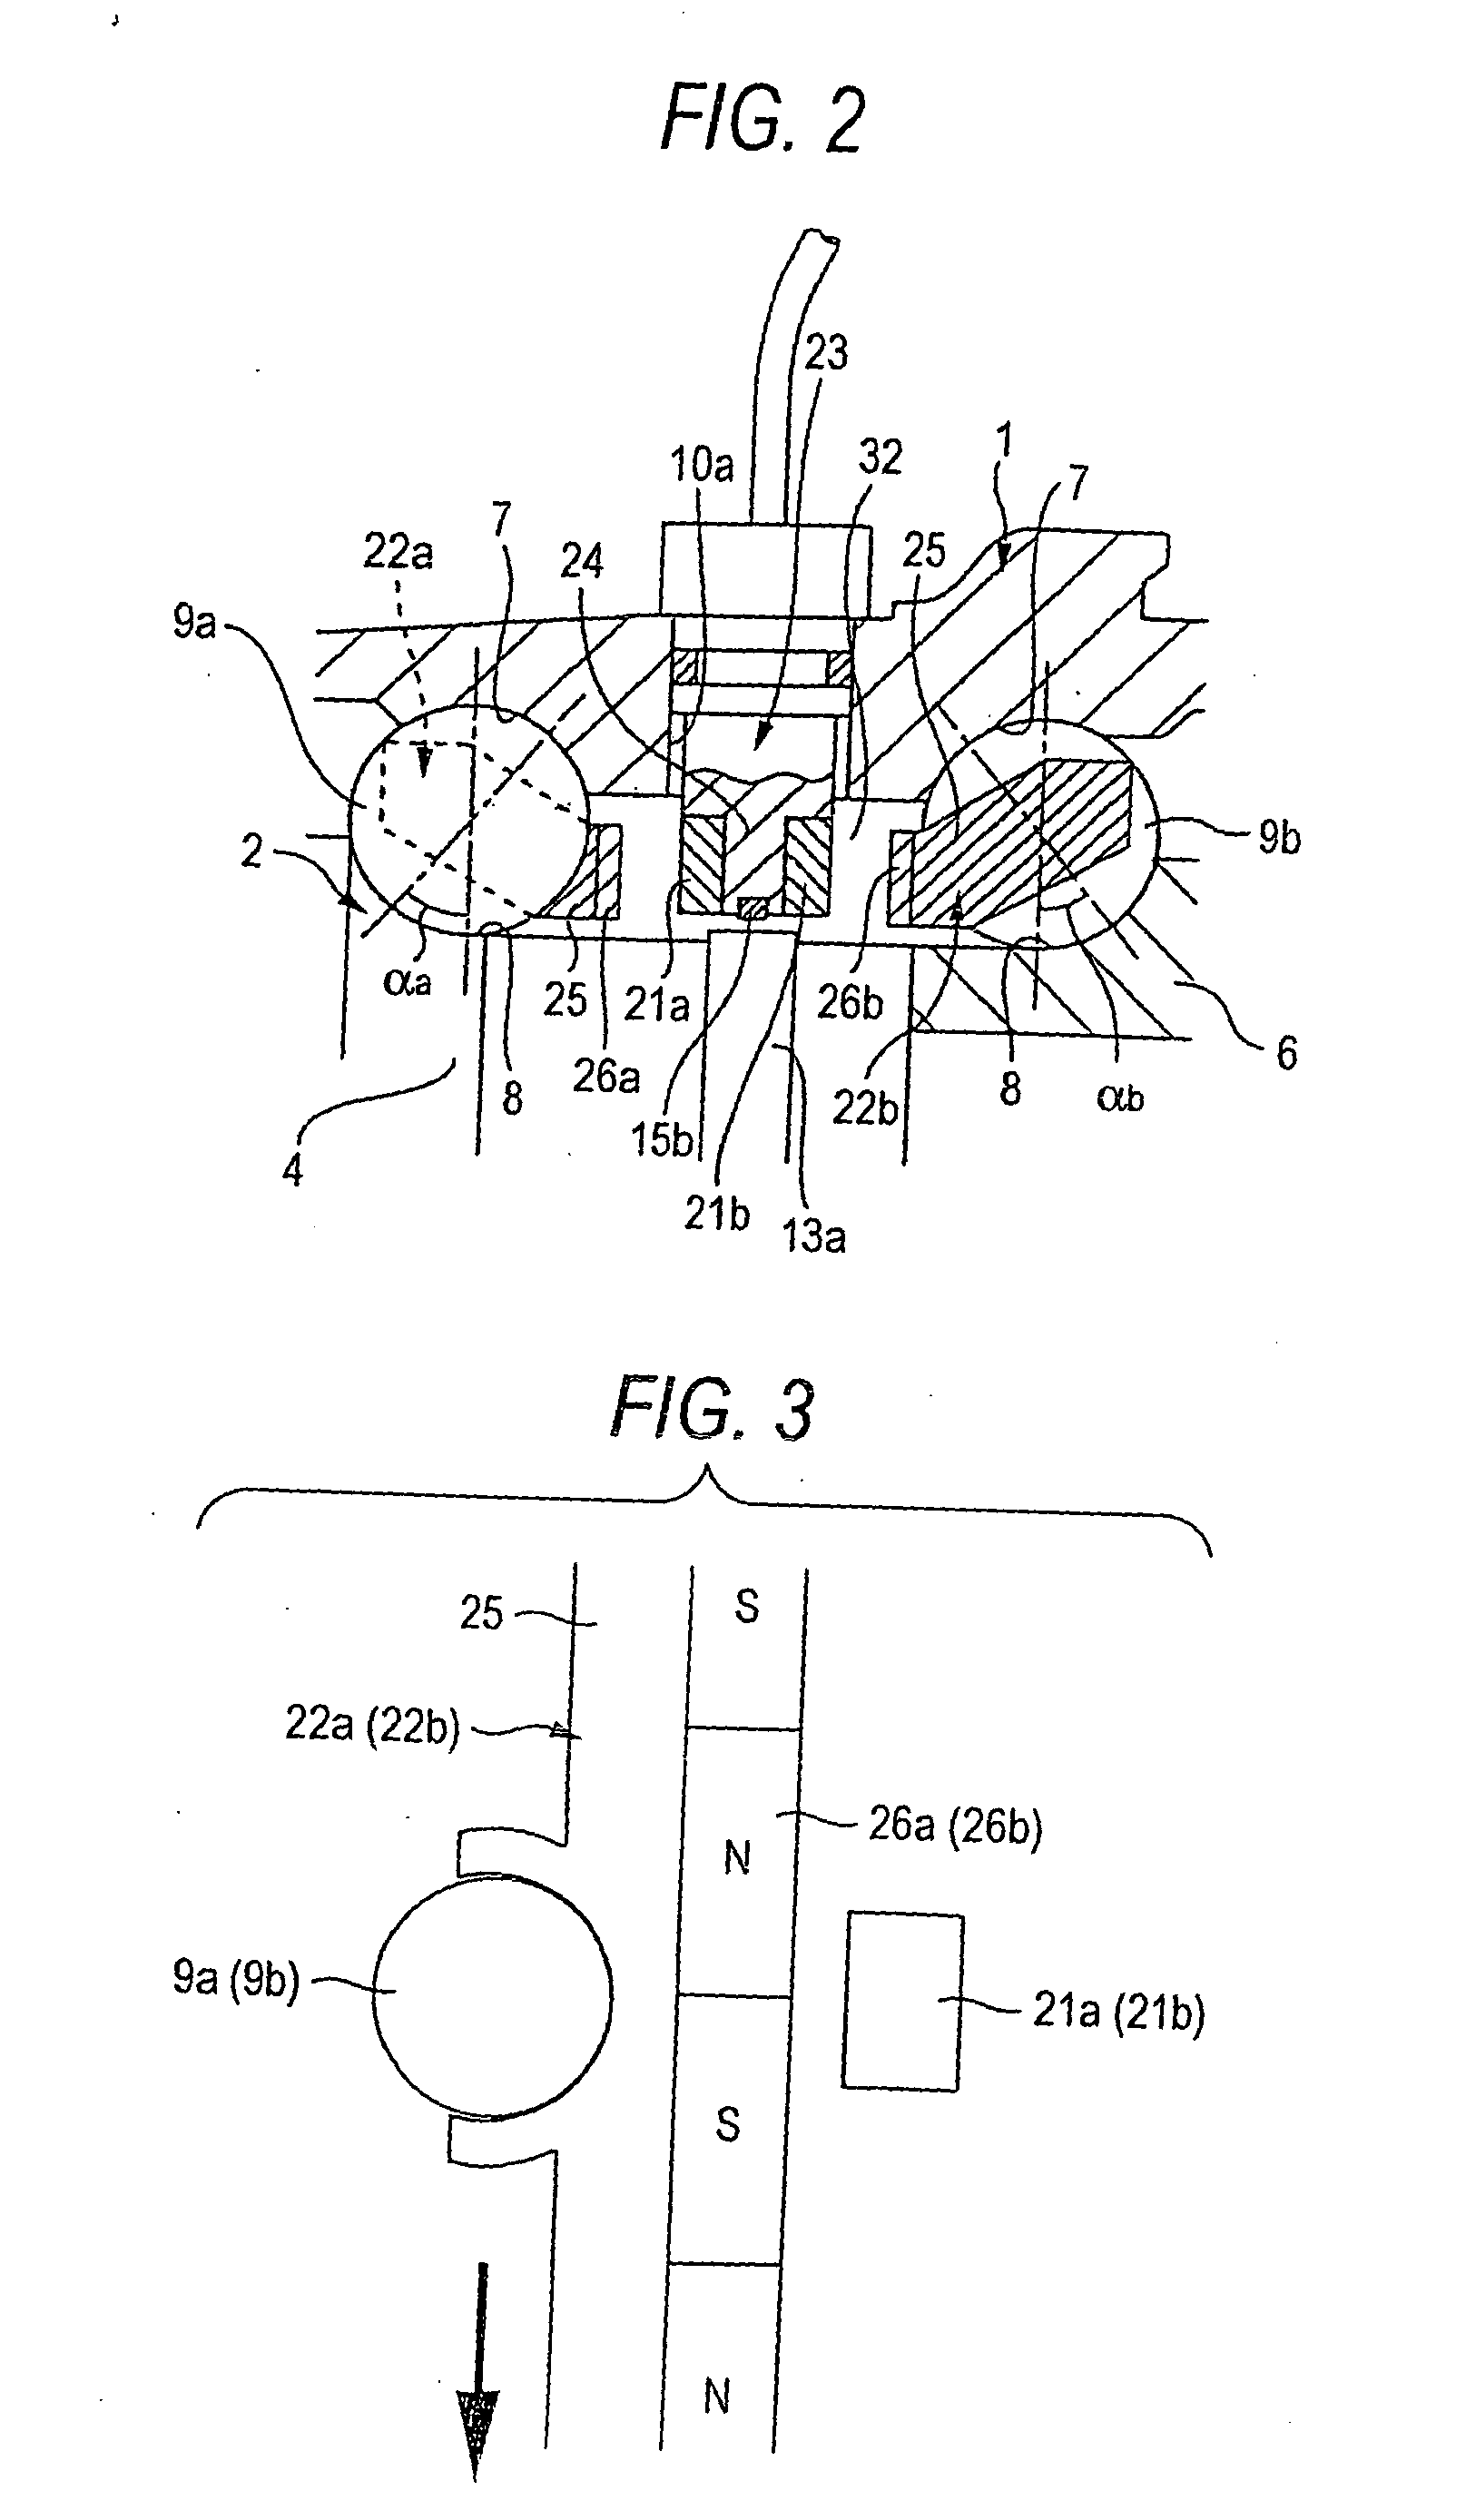 Load measuring device for rolling bearing unit and load measuring rolling bearing unit